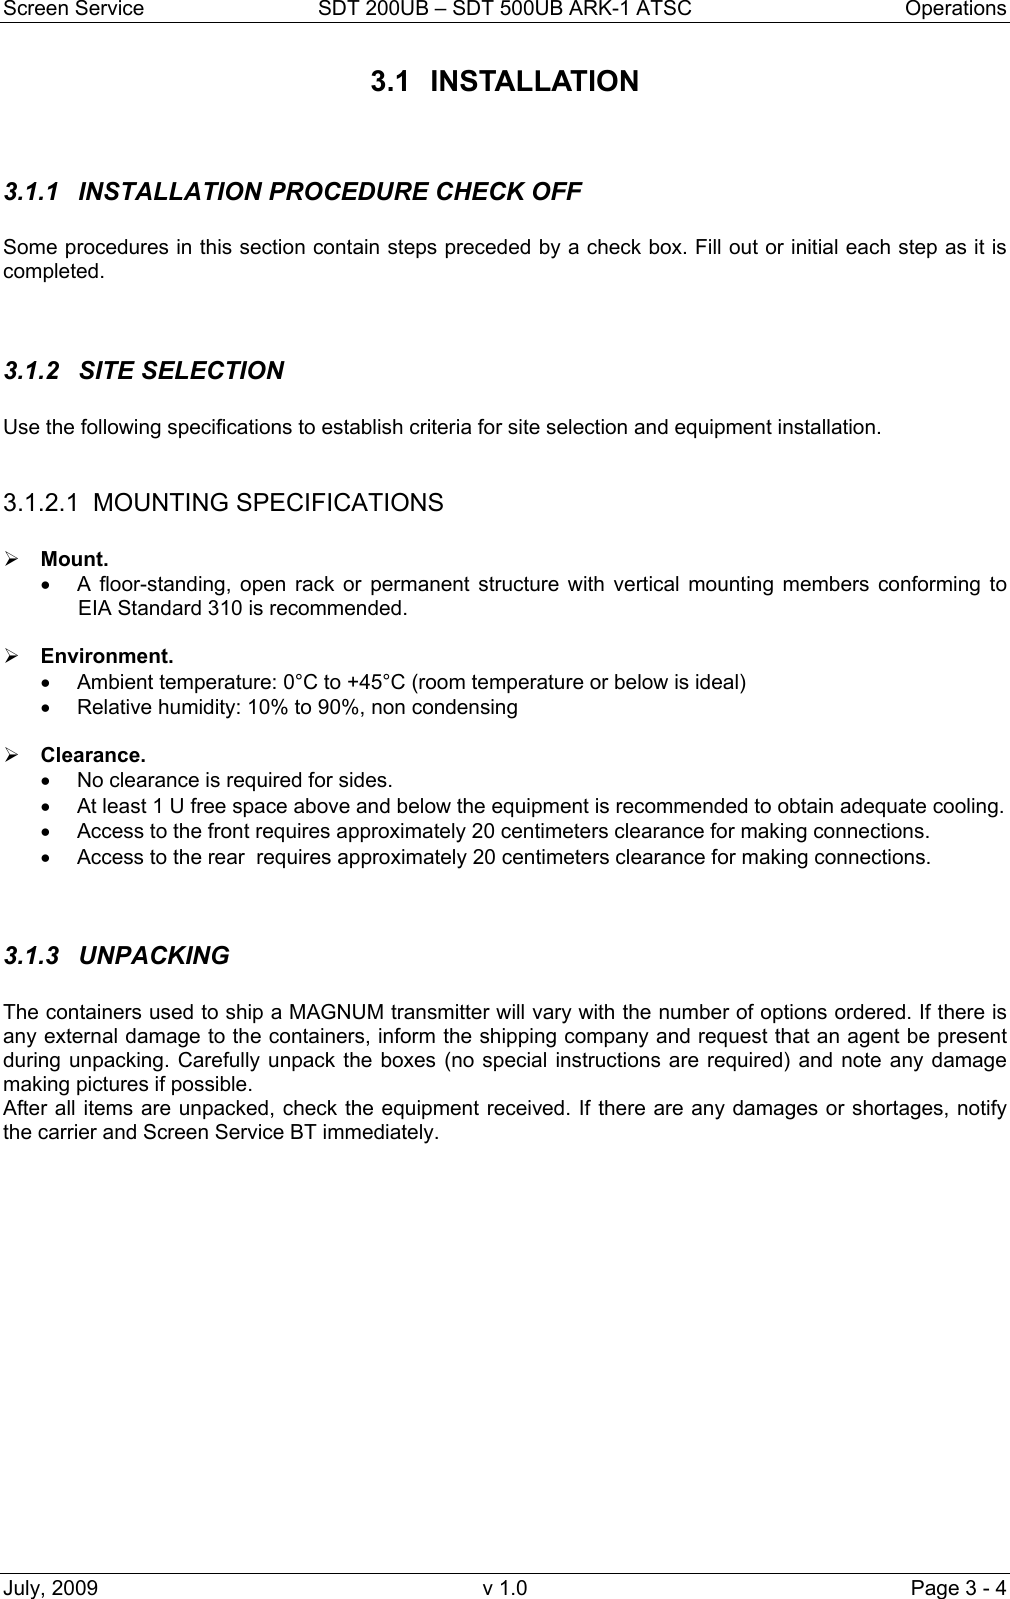 Screen Service  SDT 200UB – SDT 500UB ARK-1 ATSC  Operations July, 2009  v 1.0  Page 3 - 4 3.1 INSTALLATION   3.1.1  INSTALLATION PROCEDURE CHECK OFF  Some procedures in this section contain steps preceded by a check box. Fill out or initial each step as it is completed.   3.1.2 SITE SELECTION  Use the following specifications to establish criteria for site selection and equipment installation.  3.1.2.1 MOUNTING SPECIFICATIONS  ¾ Mount.  •  A floor-standing, open rack or permanent structure with vertical mounting members conforming to EIA Standard 310 is recommended.  ¾ Environment. •  Ambient temperature: 0°C to +45°C (room temperature or below is ideal) •  Relative humidity: 10% to 90%, non condensing   ¾ Clearance.  •  No clearance is required for sides.  •  At least 1 U free space above and below the equipment is recommended to obtain adequate cooling. •  Access to the front requires approximately 20 centimeters clearance for making connections. •  Access to the rear  requires approximately 20 centimeters clearance for making connections.   3.1.3 UNPACKING  The containers used to ship a MAGNUM transmitter will vary with the number of options ordered. If there is any external damage to the containers, inform the shipping company and request that an agent be present during unpacking. Carefully unpack the boxes (no special instructions are required) and note any damage making pictures if possible. After all items are unpacked, check the equipment received. If there are any damages or shortages, notify the carrier and Screen Service BT immediately.               